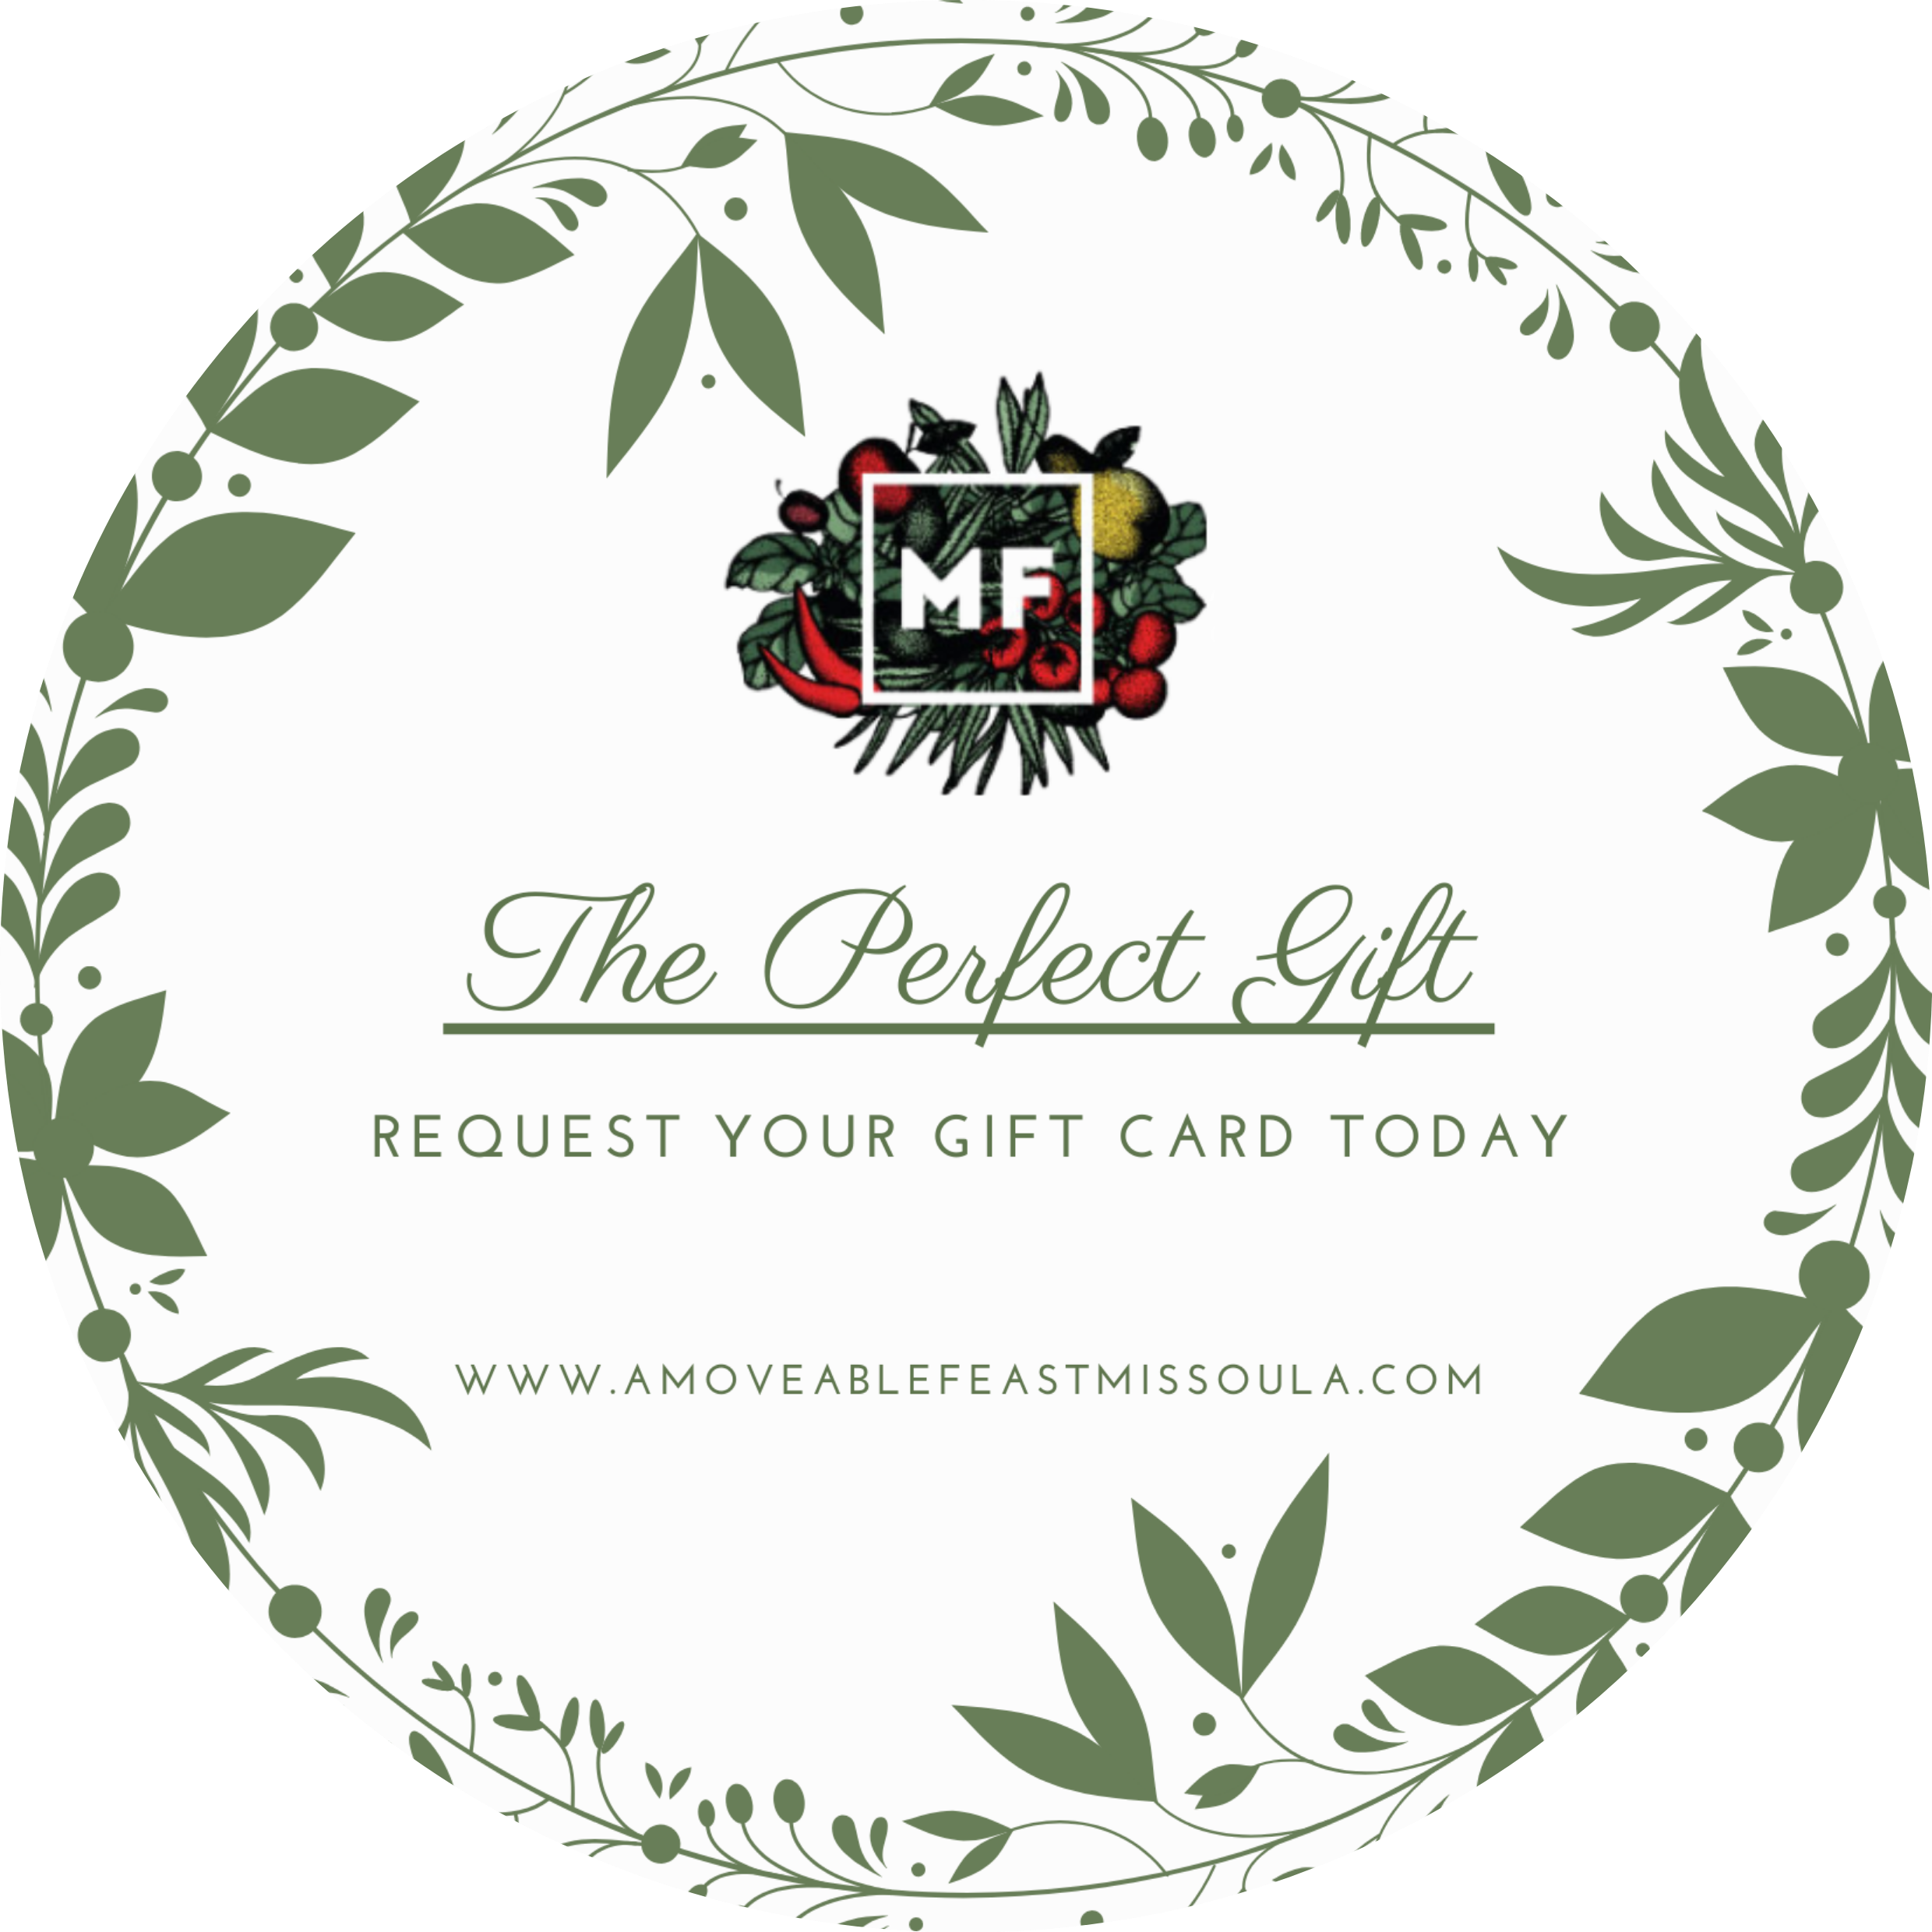 Catering Gift Cards, A Moveable Feast Gift Card, Cooking Class Gift Cards, Cooking Classes, Group Classes, Corporate Classes